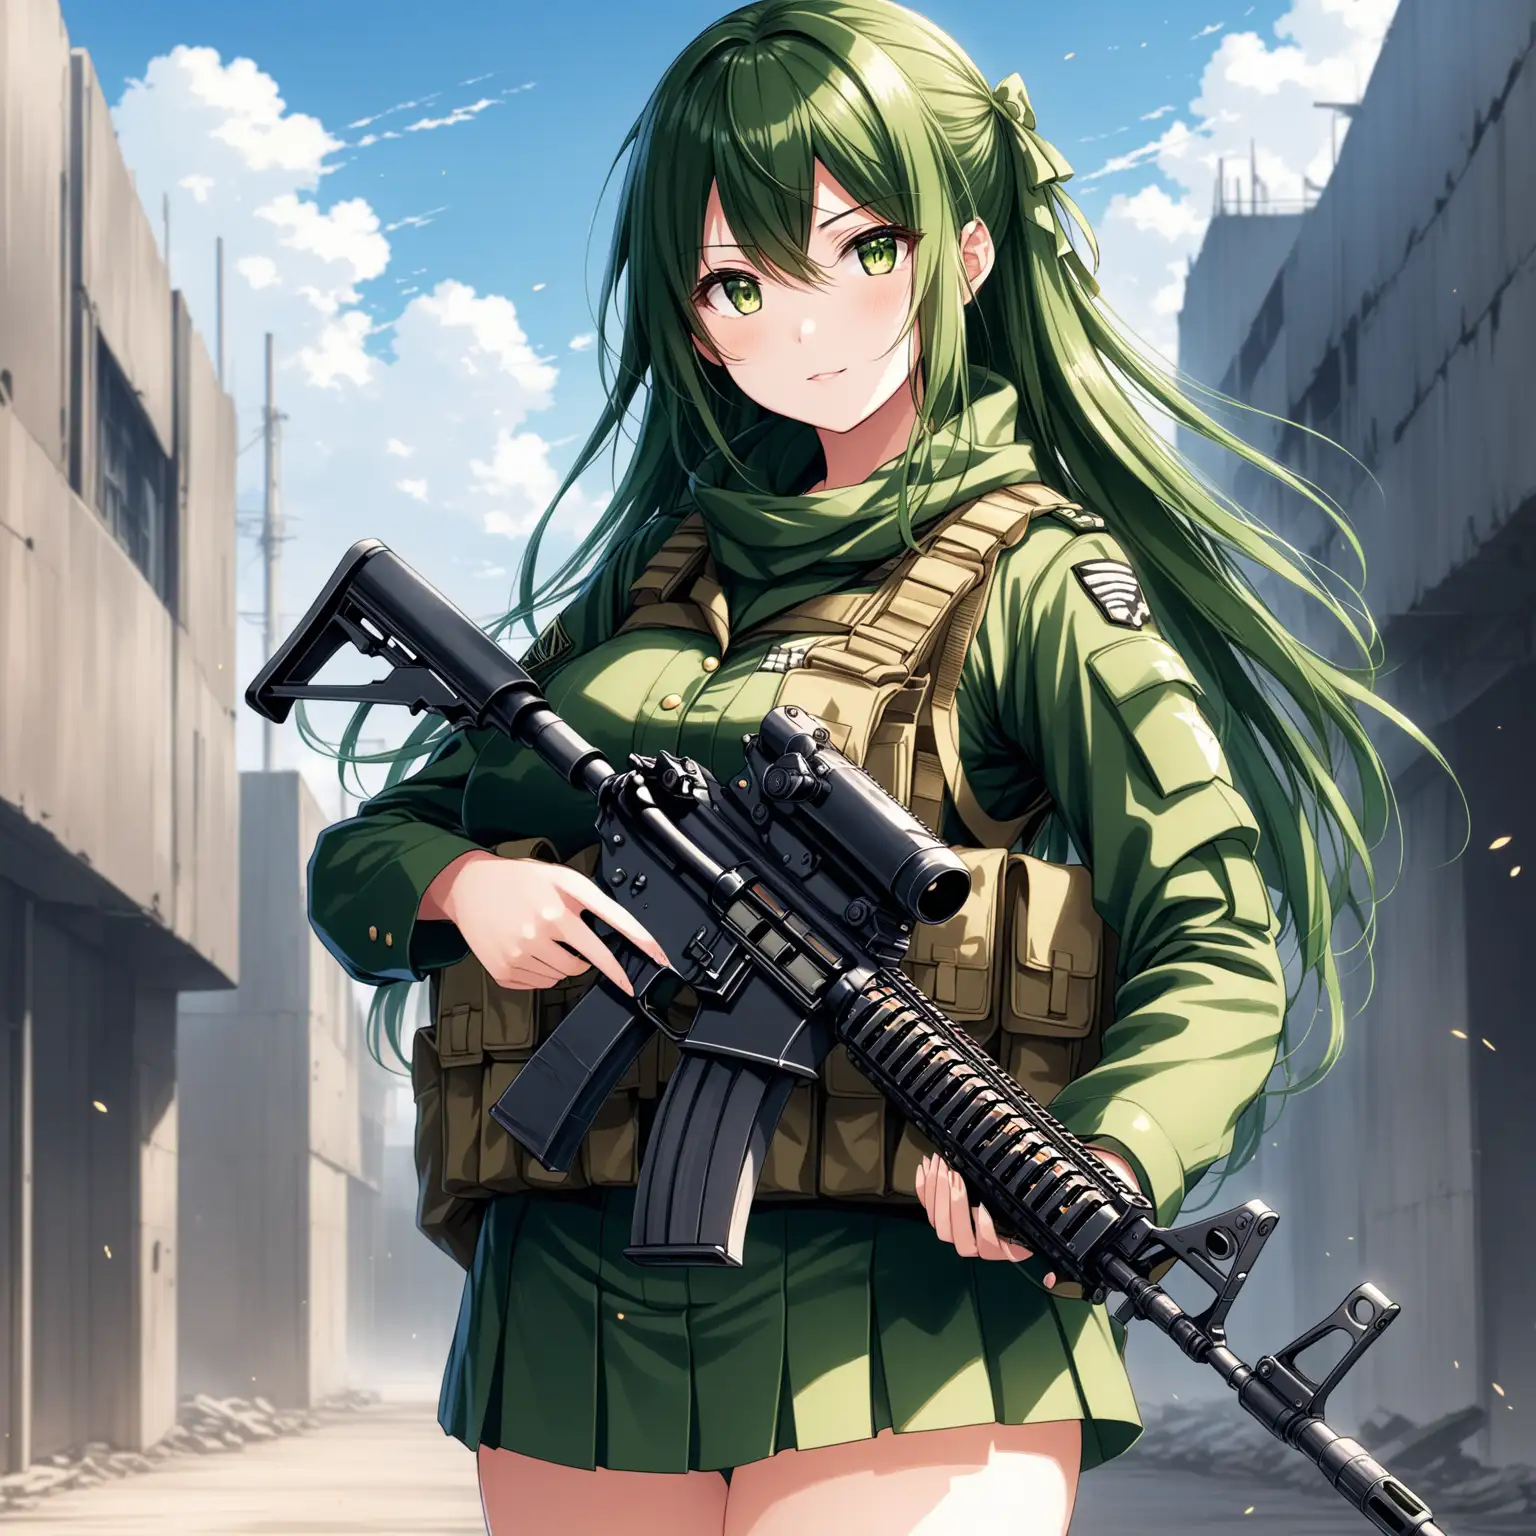 Military Anime Girl with M4A1 Rifle